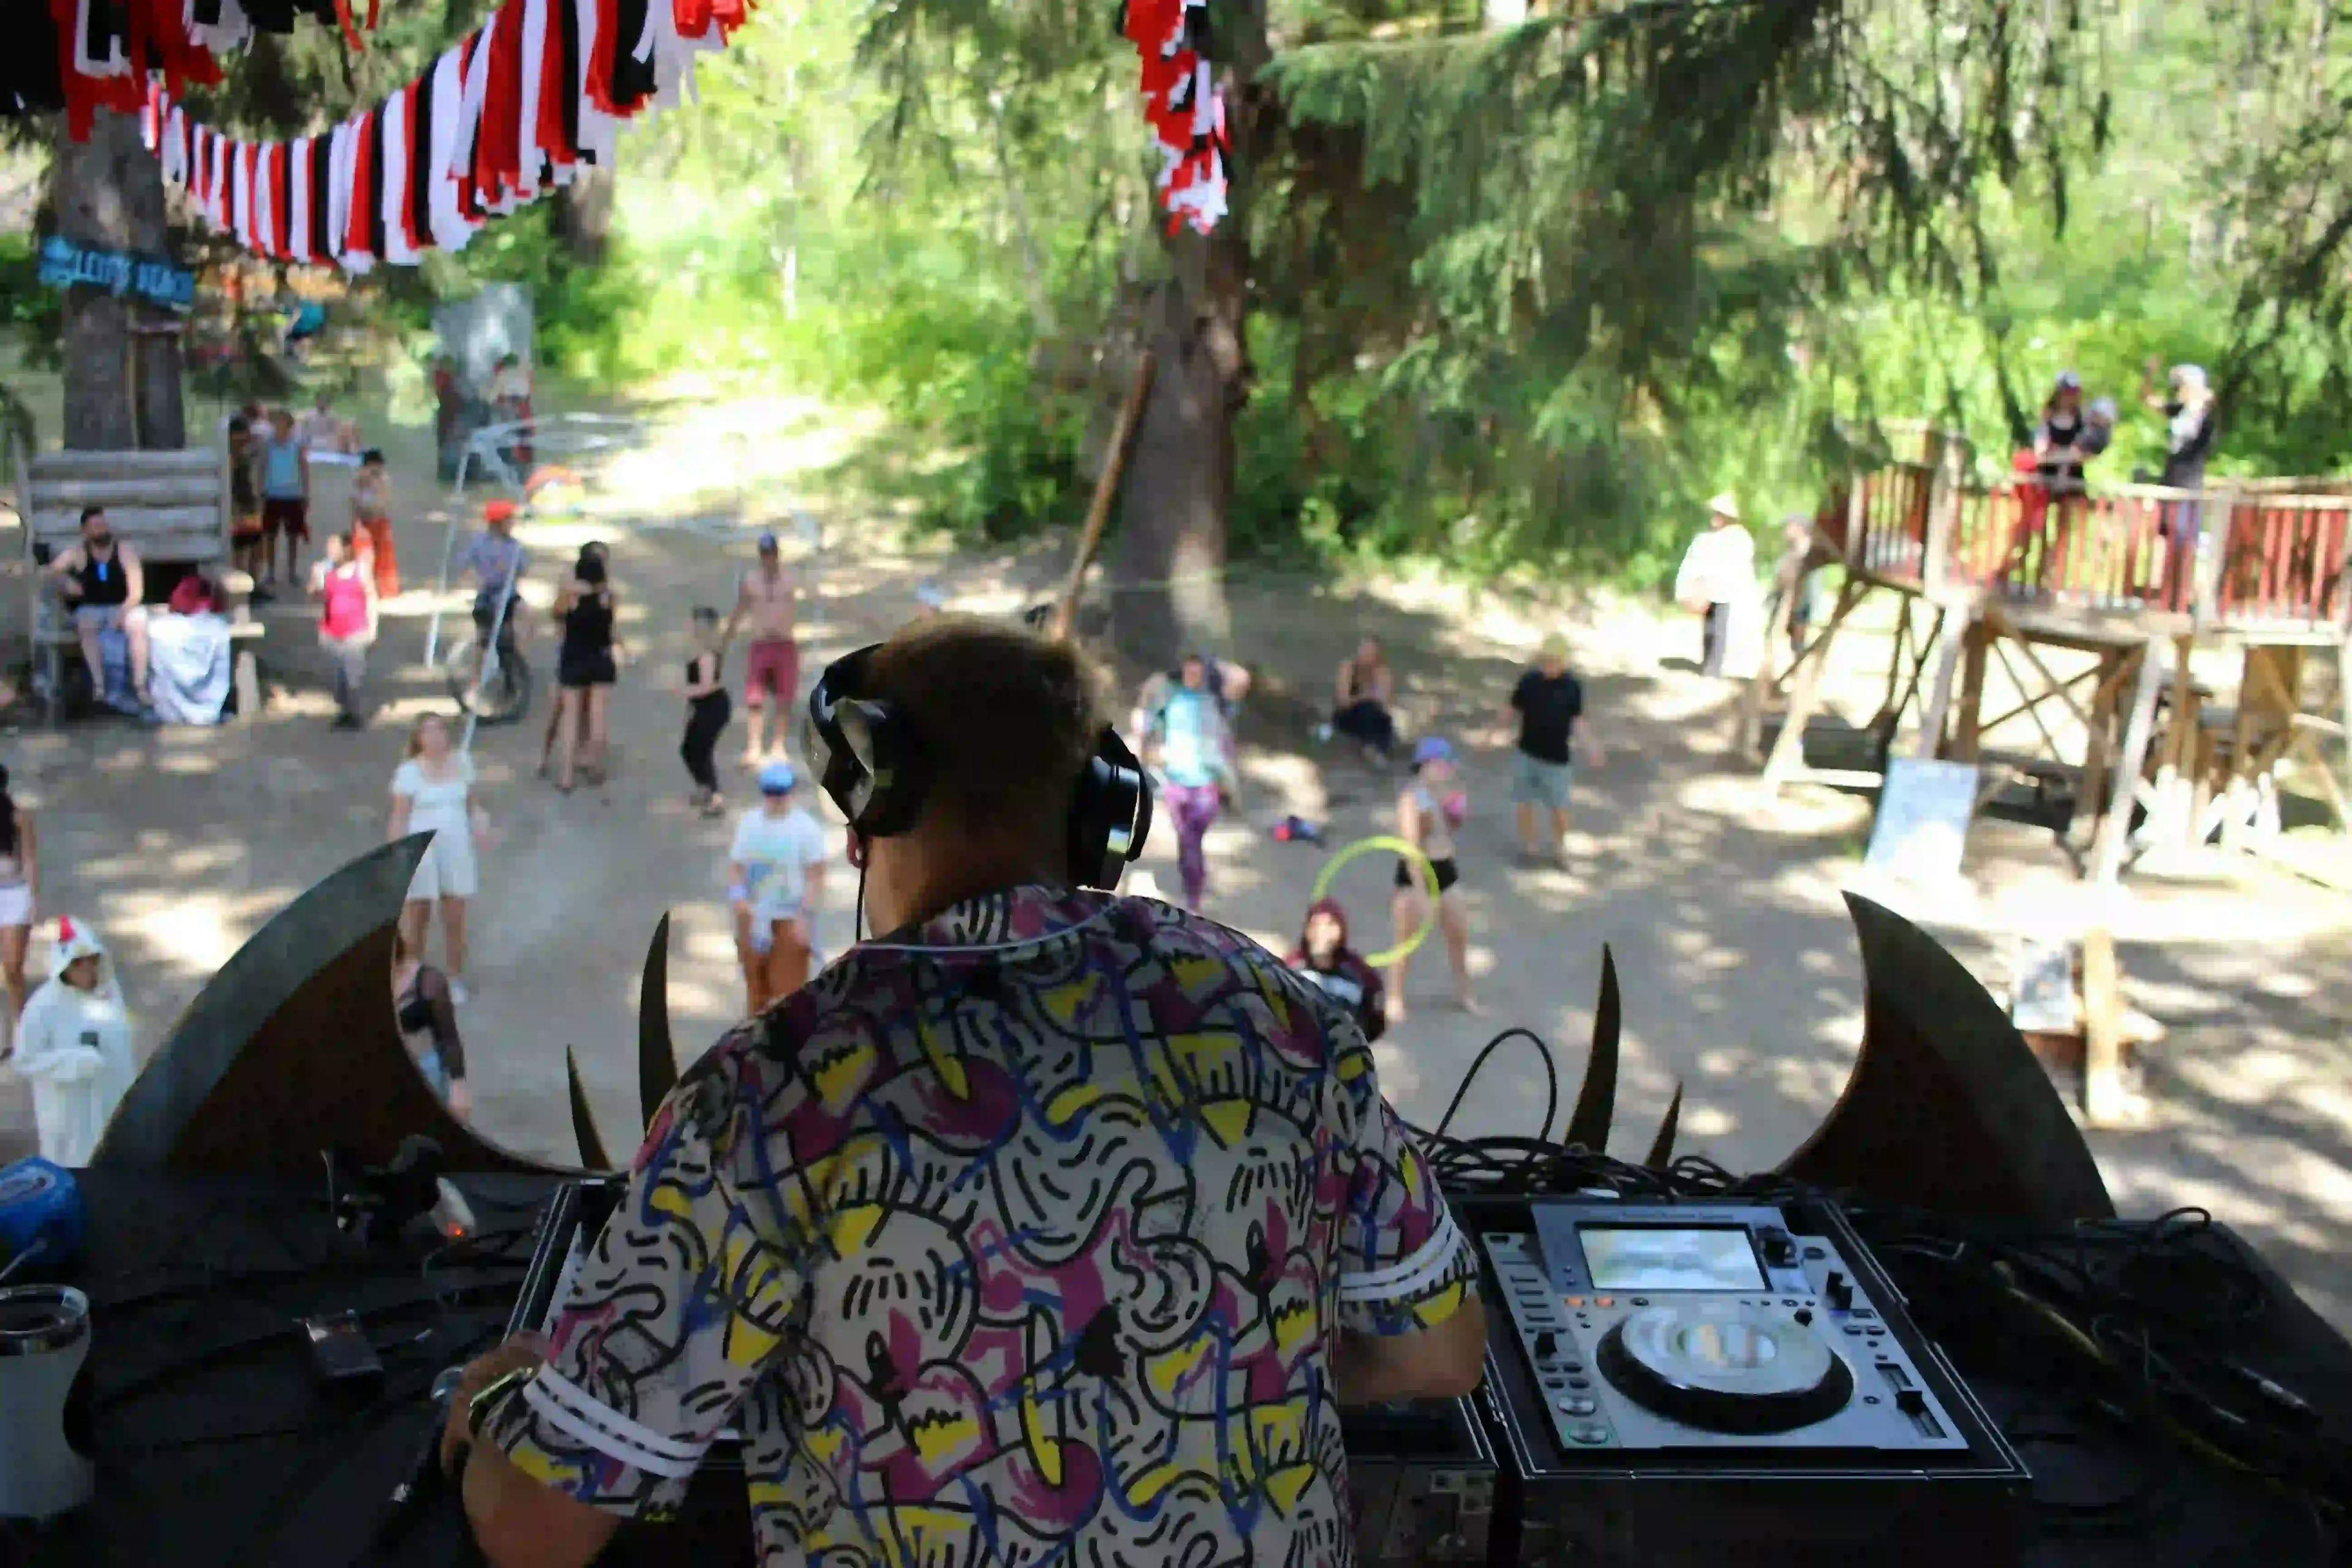 DJ performing at Leif's Beach stage with a crowd of festival attendees dancing in daylight.